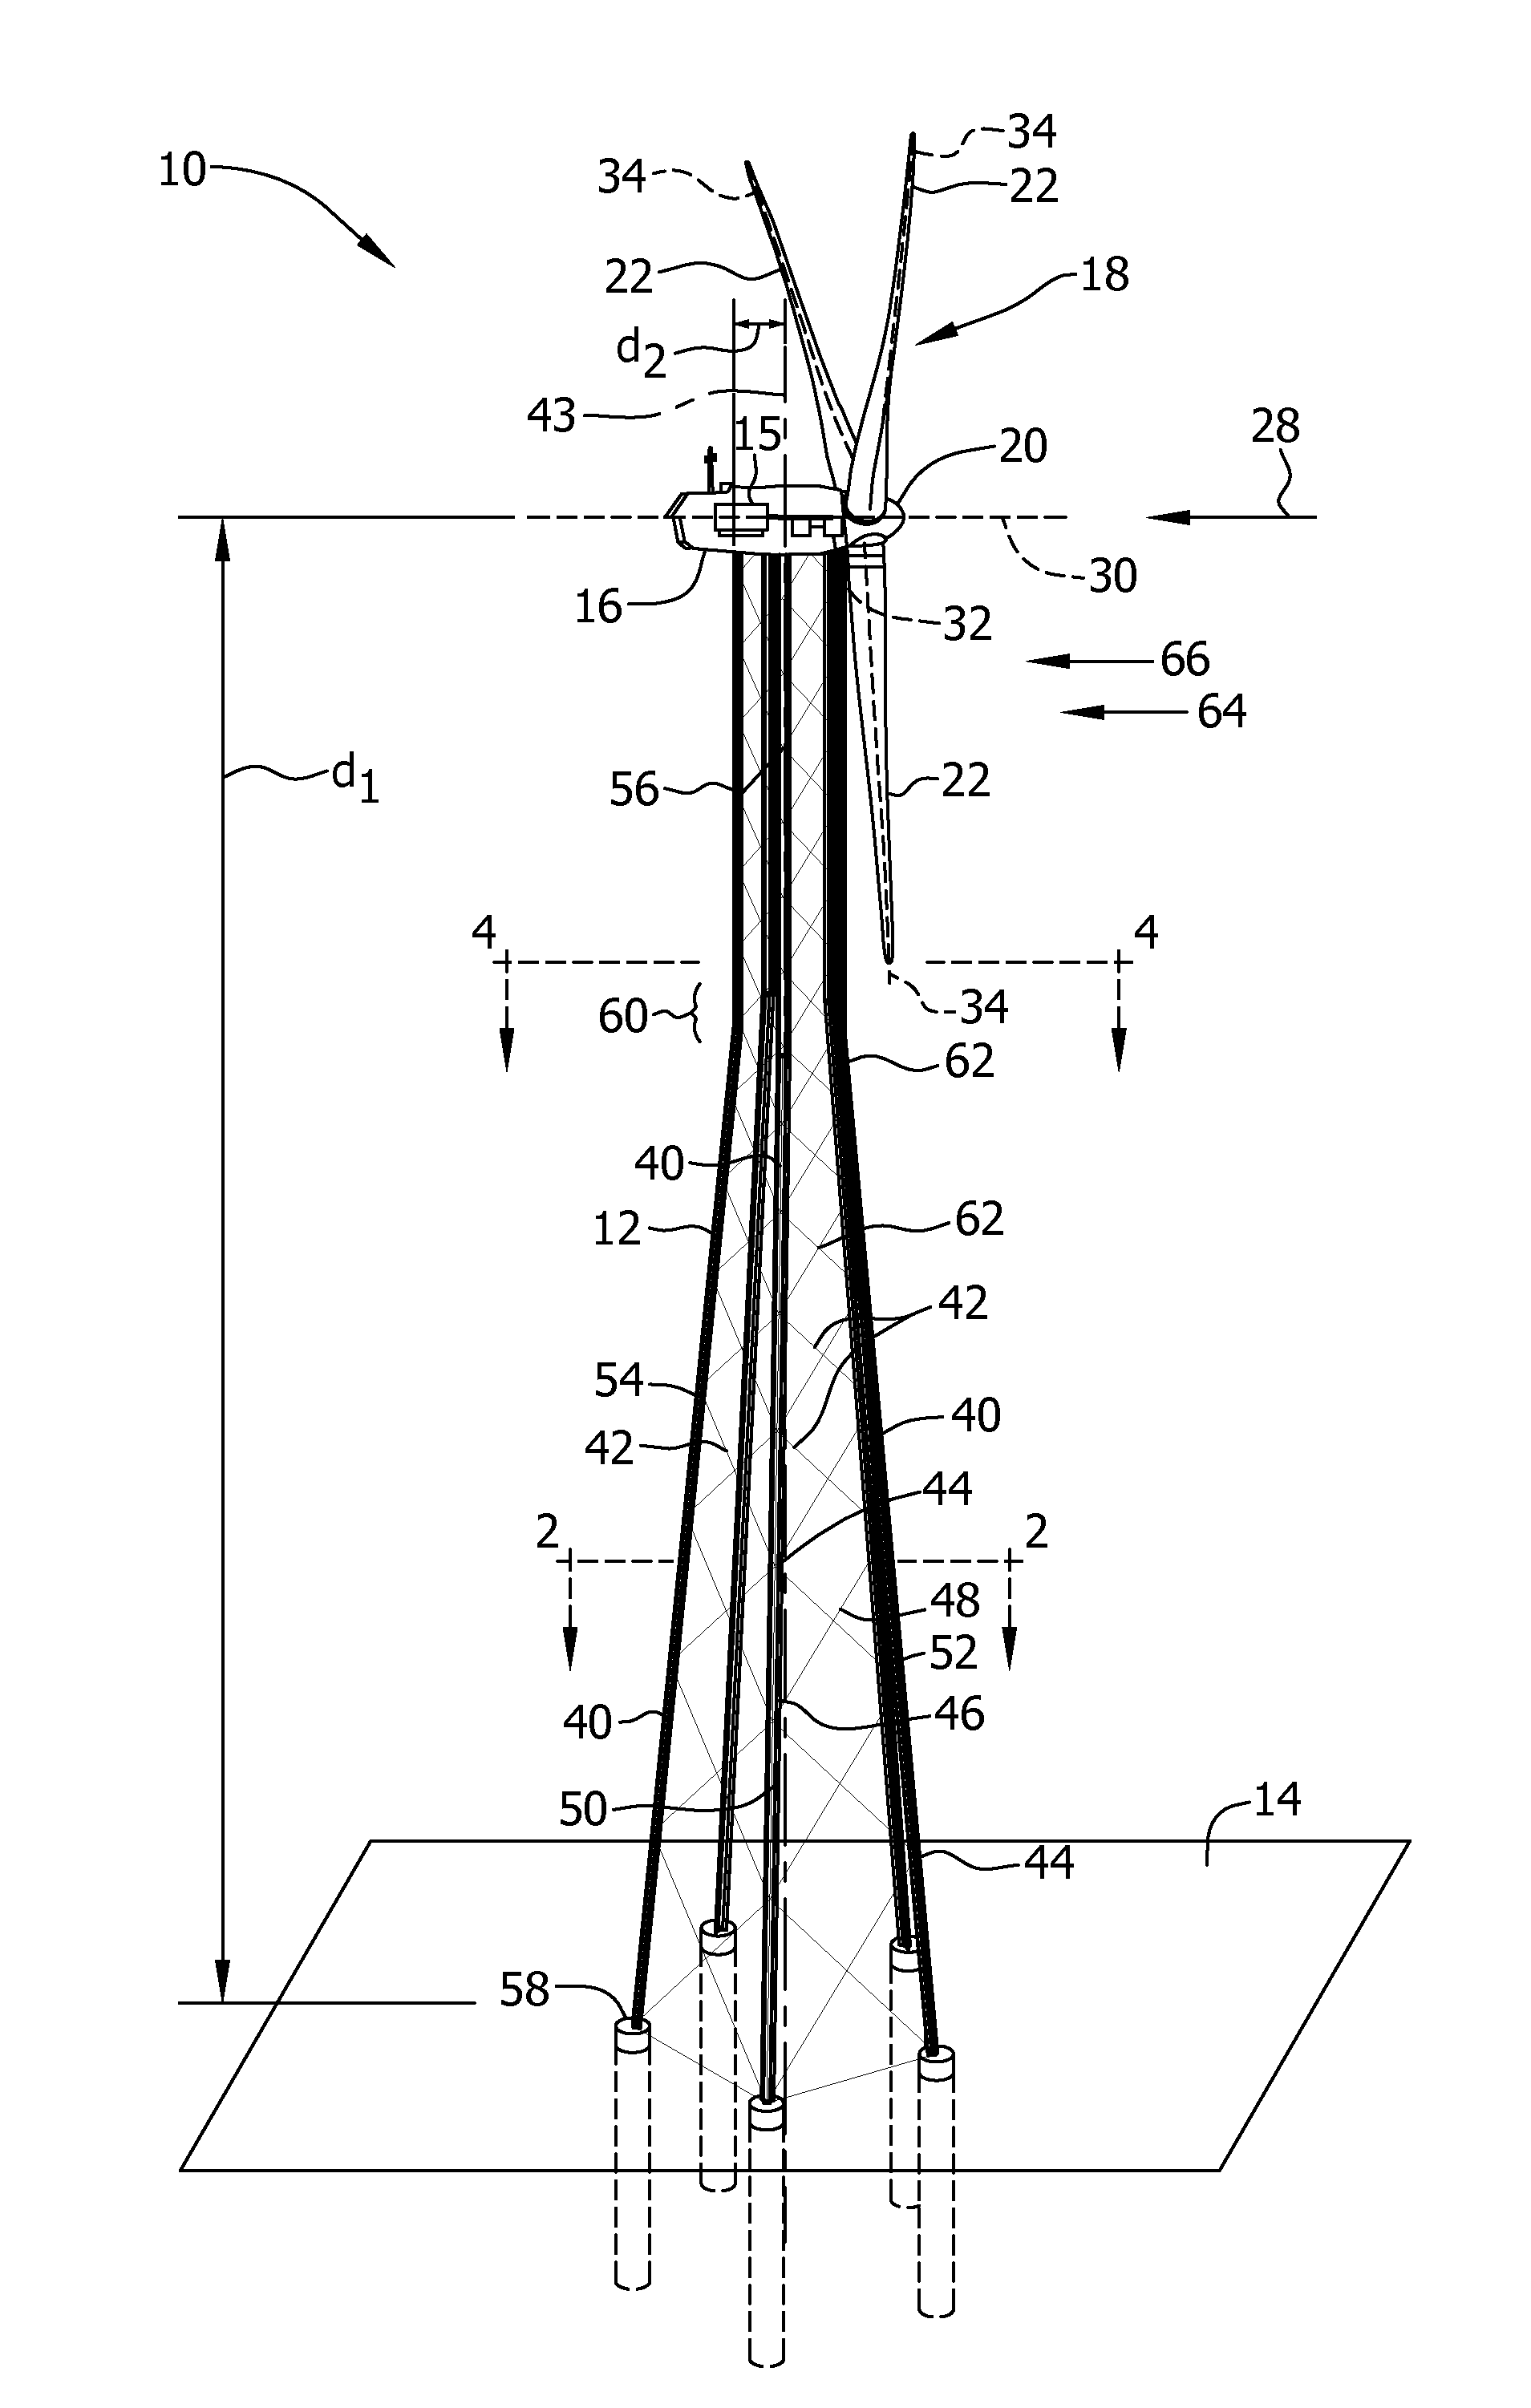 Support tower for use with a wind turbine and system for designing support tower